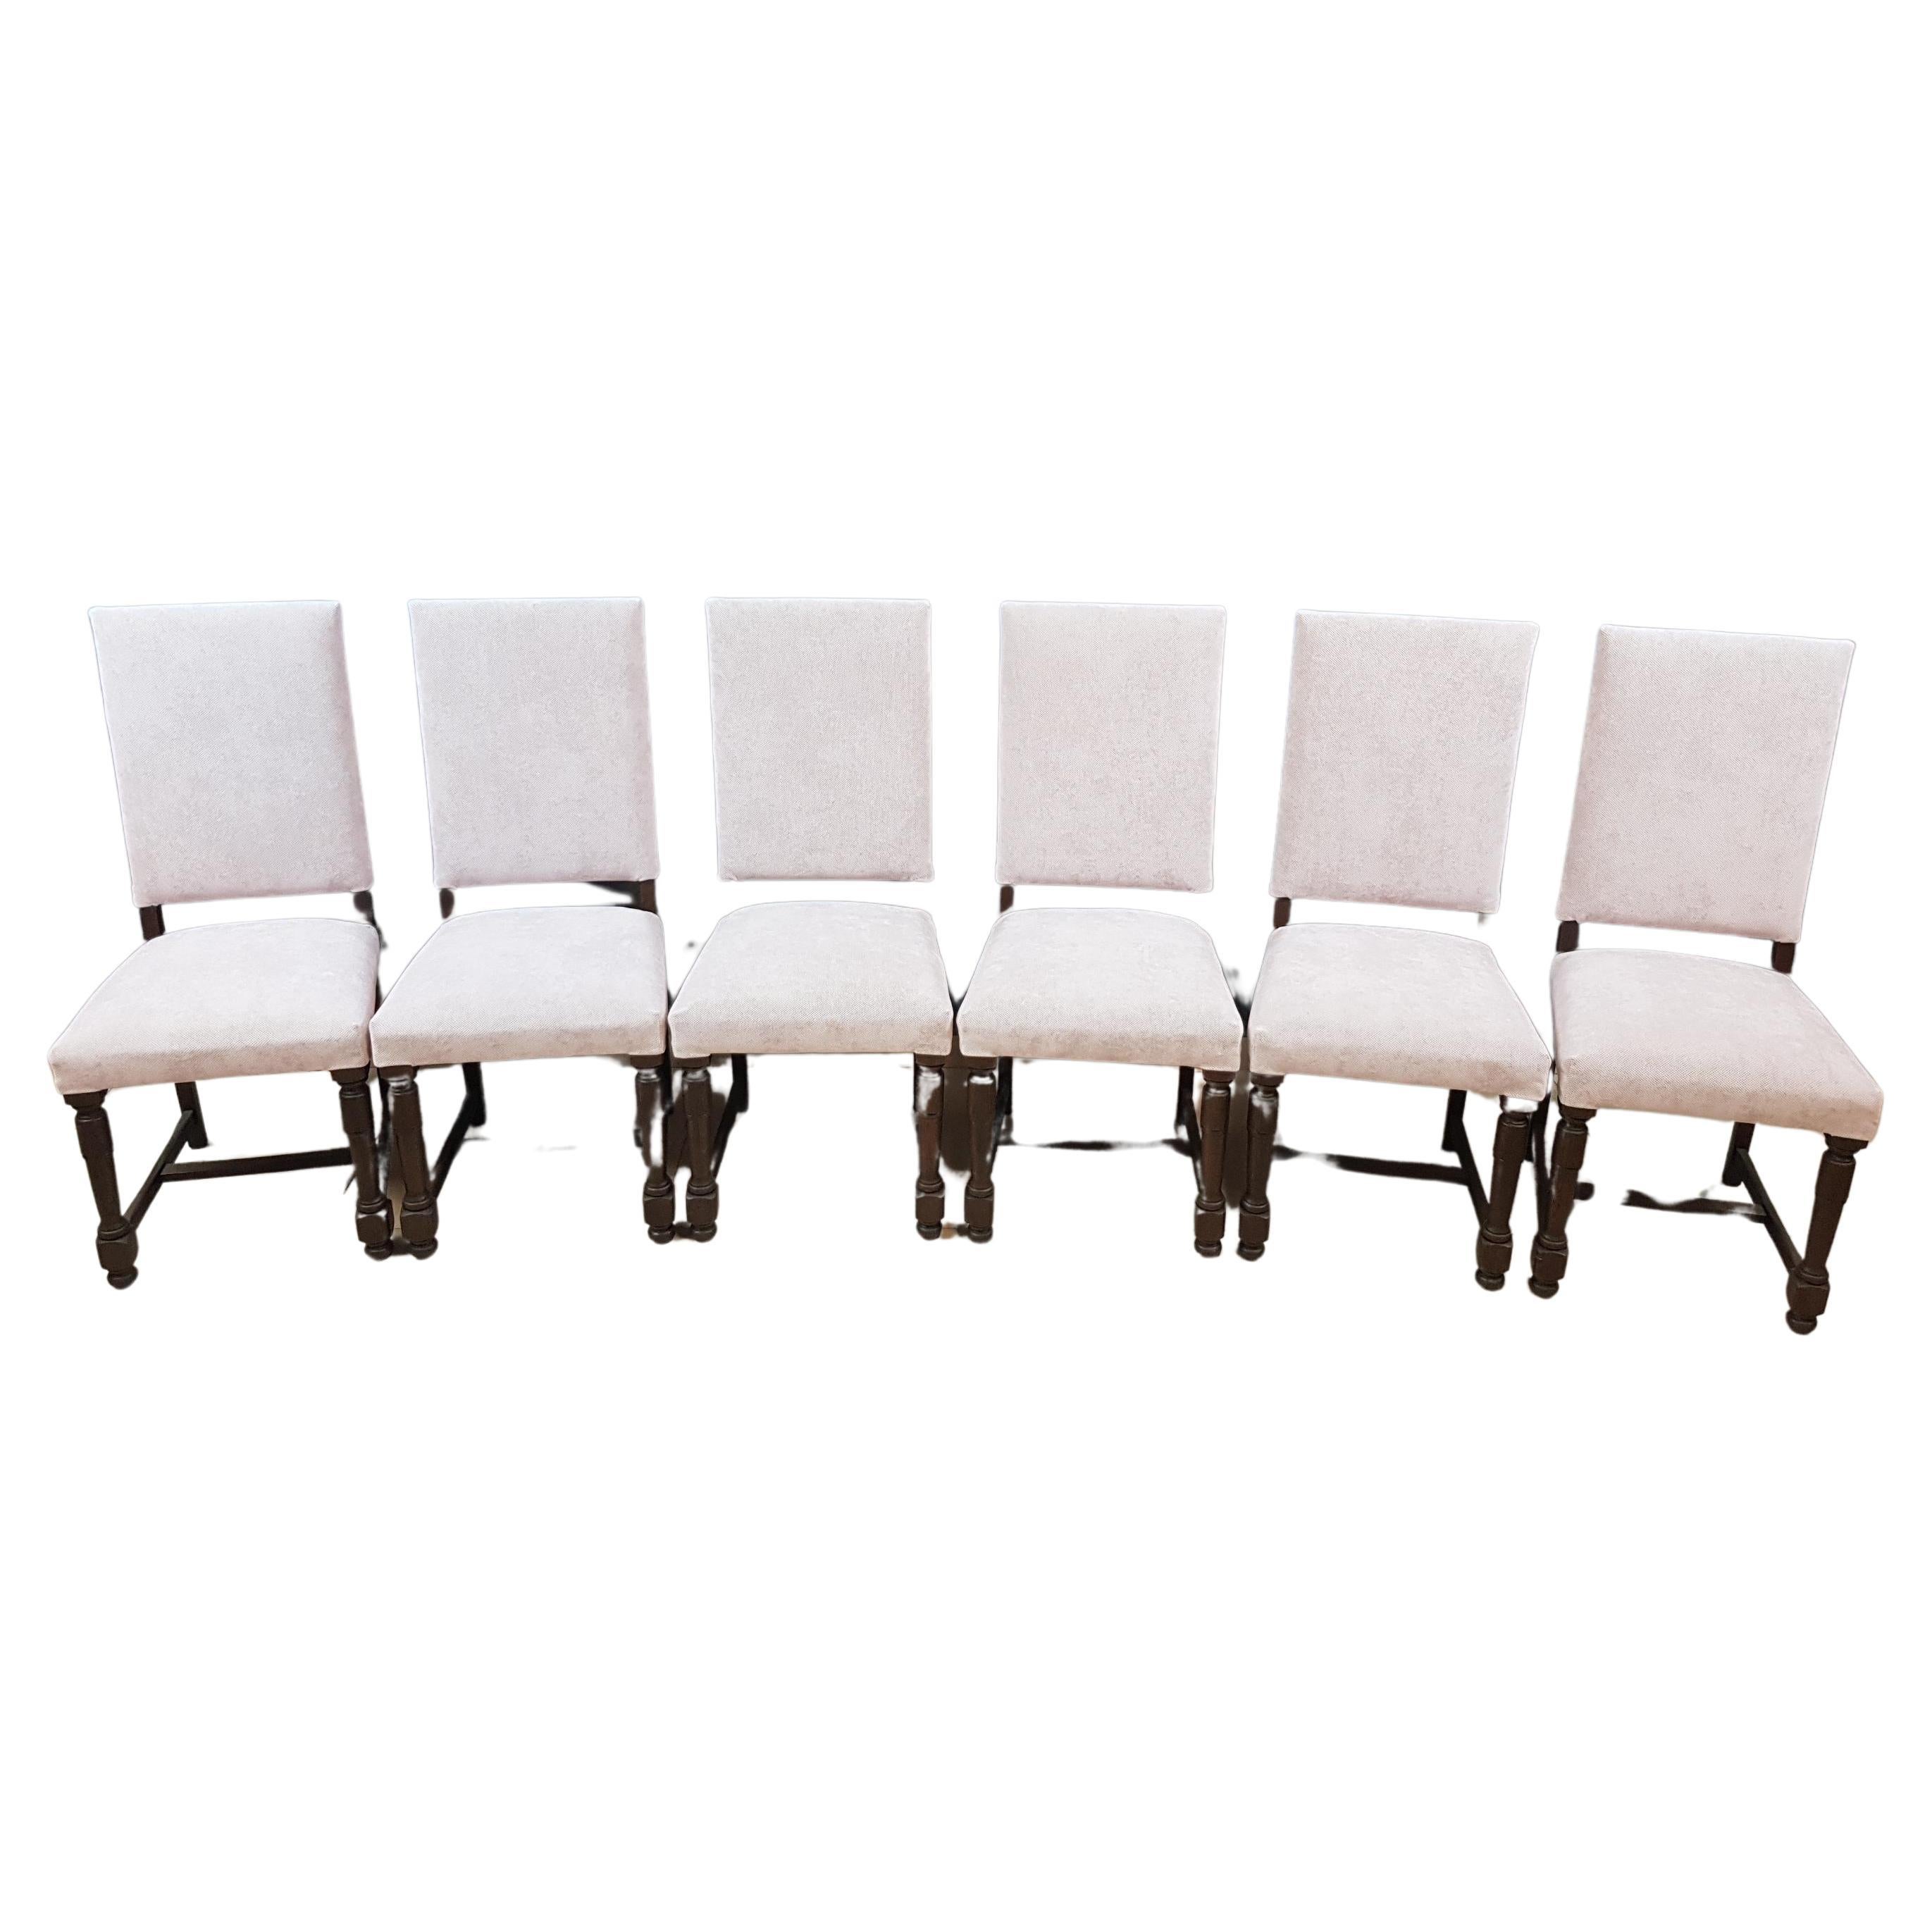 French Vintage Square Back Dining Chairs - Set of 6 For Sale